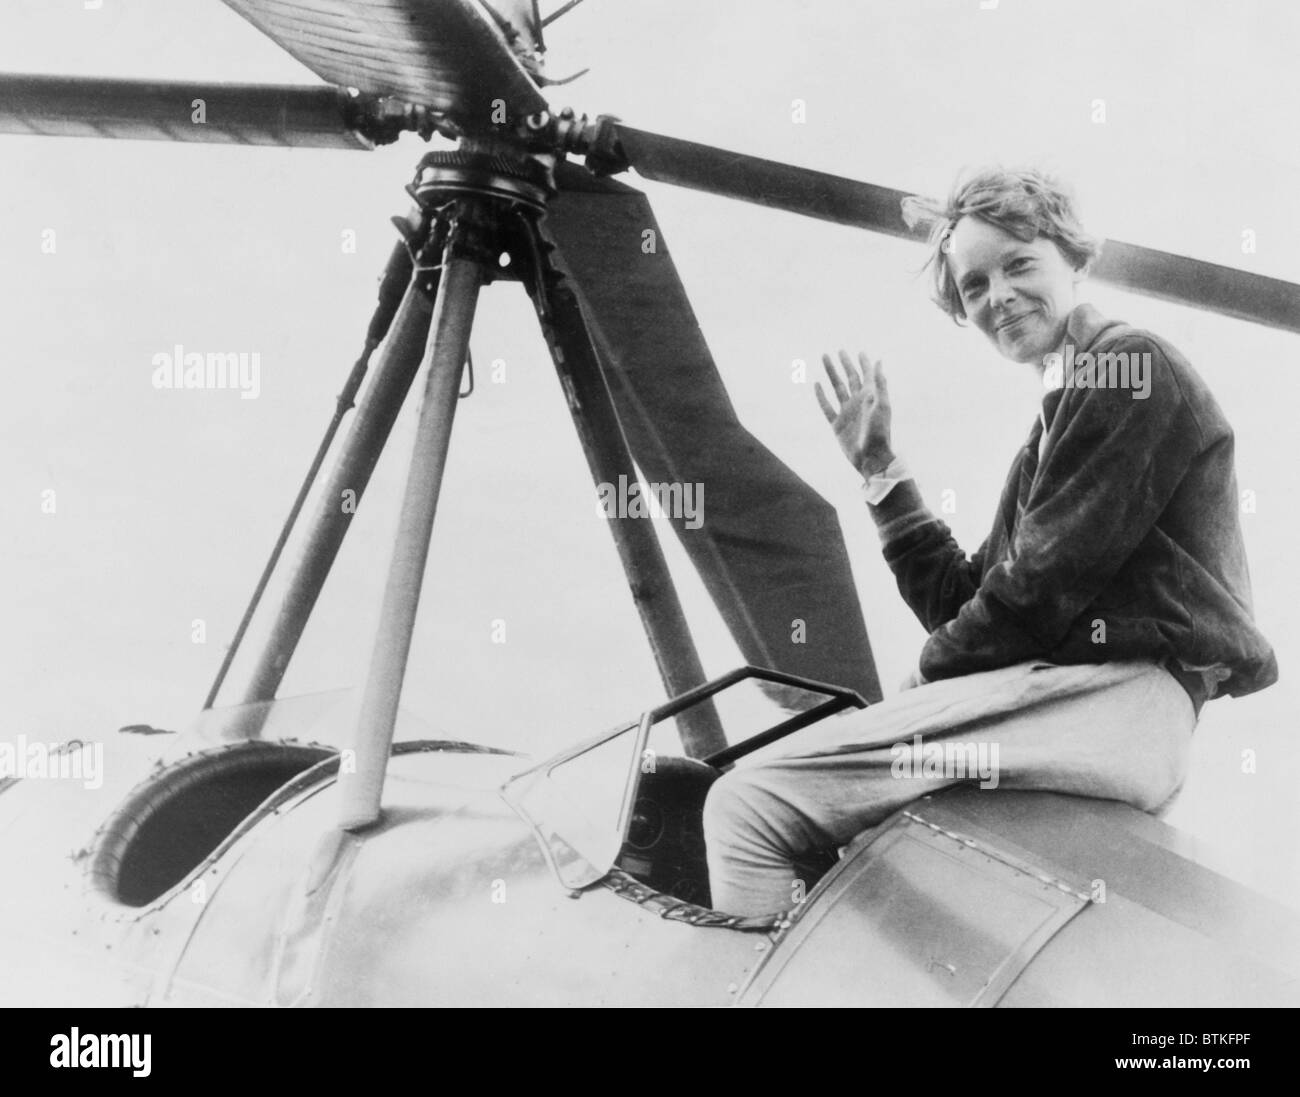 Amelia Earhart (1897-1937), waving, seated outside cockpit on top of an Autogiro, in Los Angeles, shortly after she became the first woman to complete a solo coast-to-coast flight. August 1932. Stock Photo